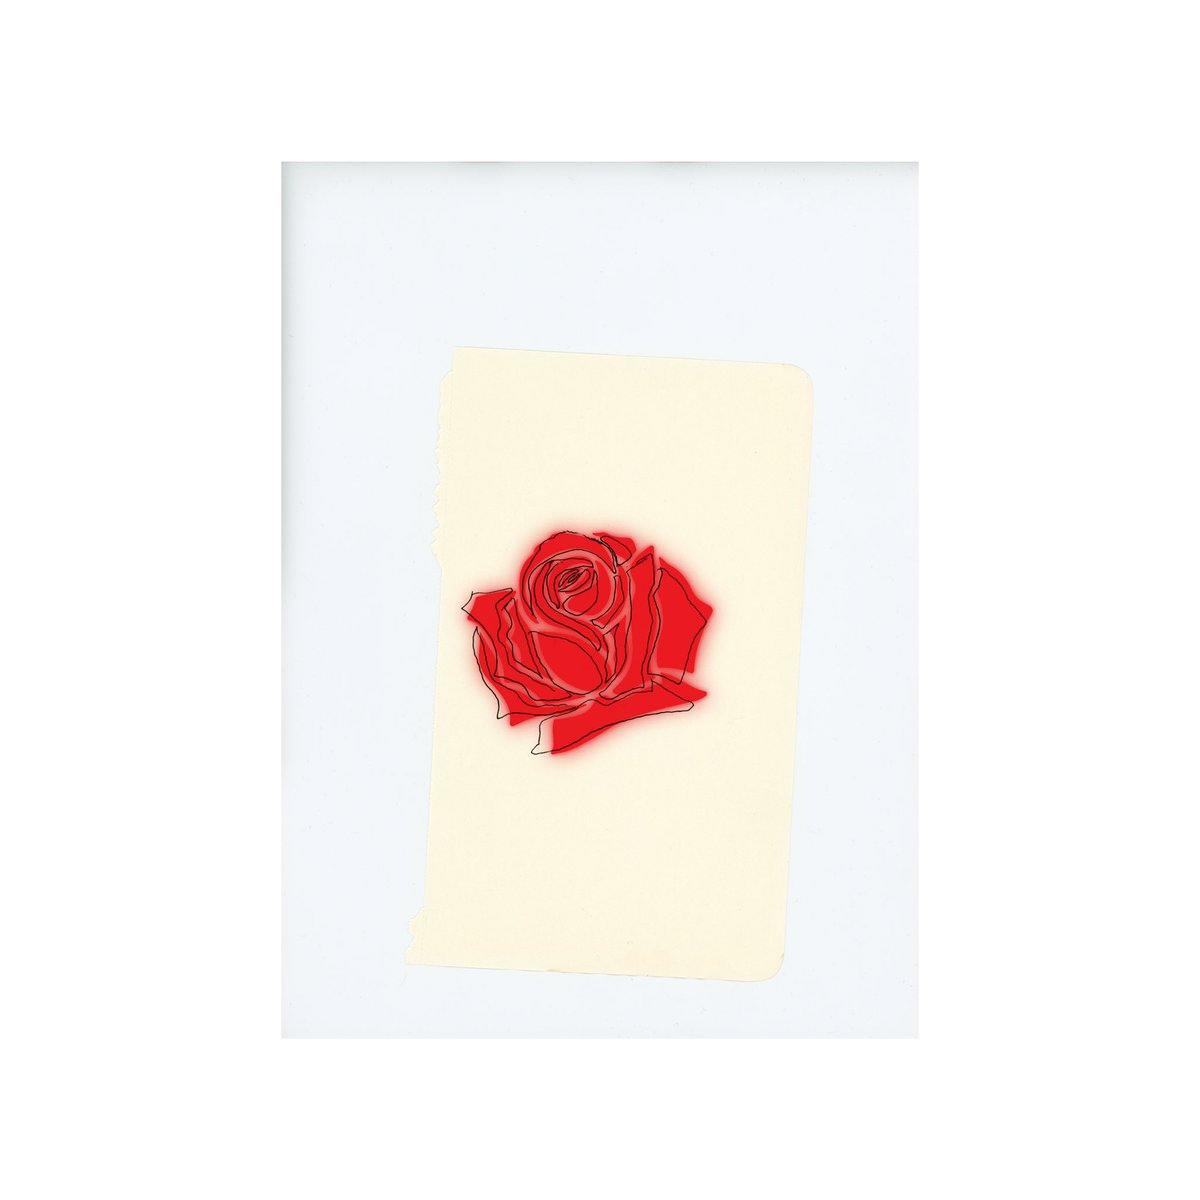 LANY by LANY album cover